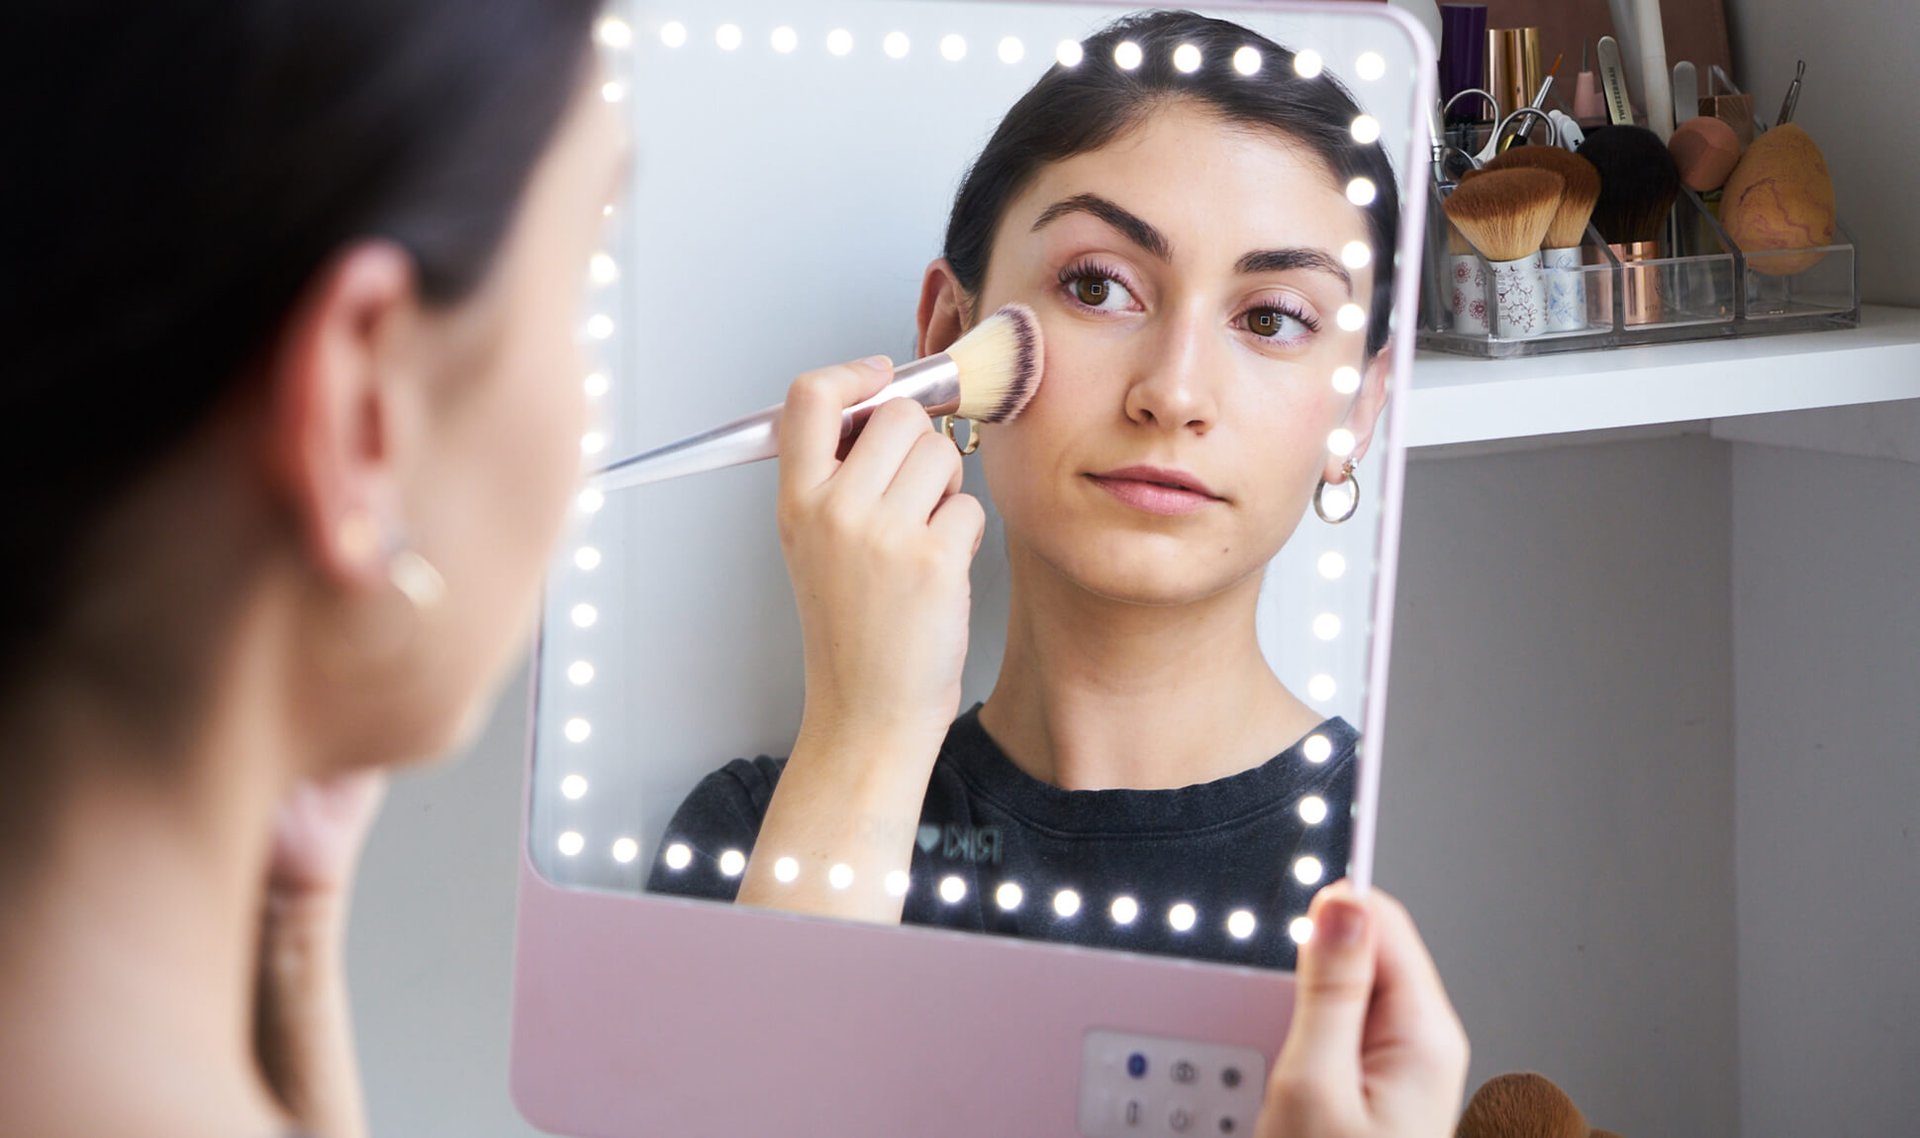 Our Editors' Favorite Mirrors for Examining Your Skin and Applying Products 